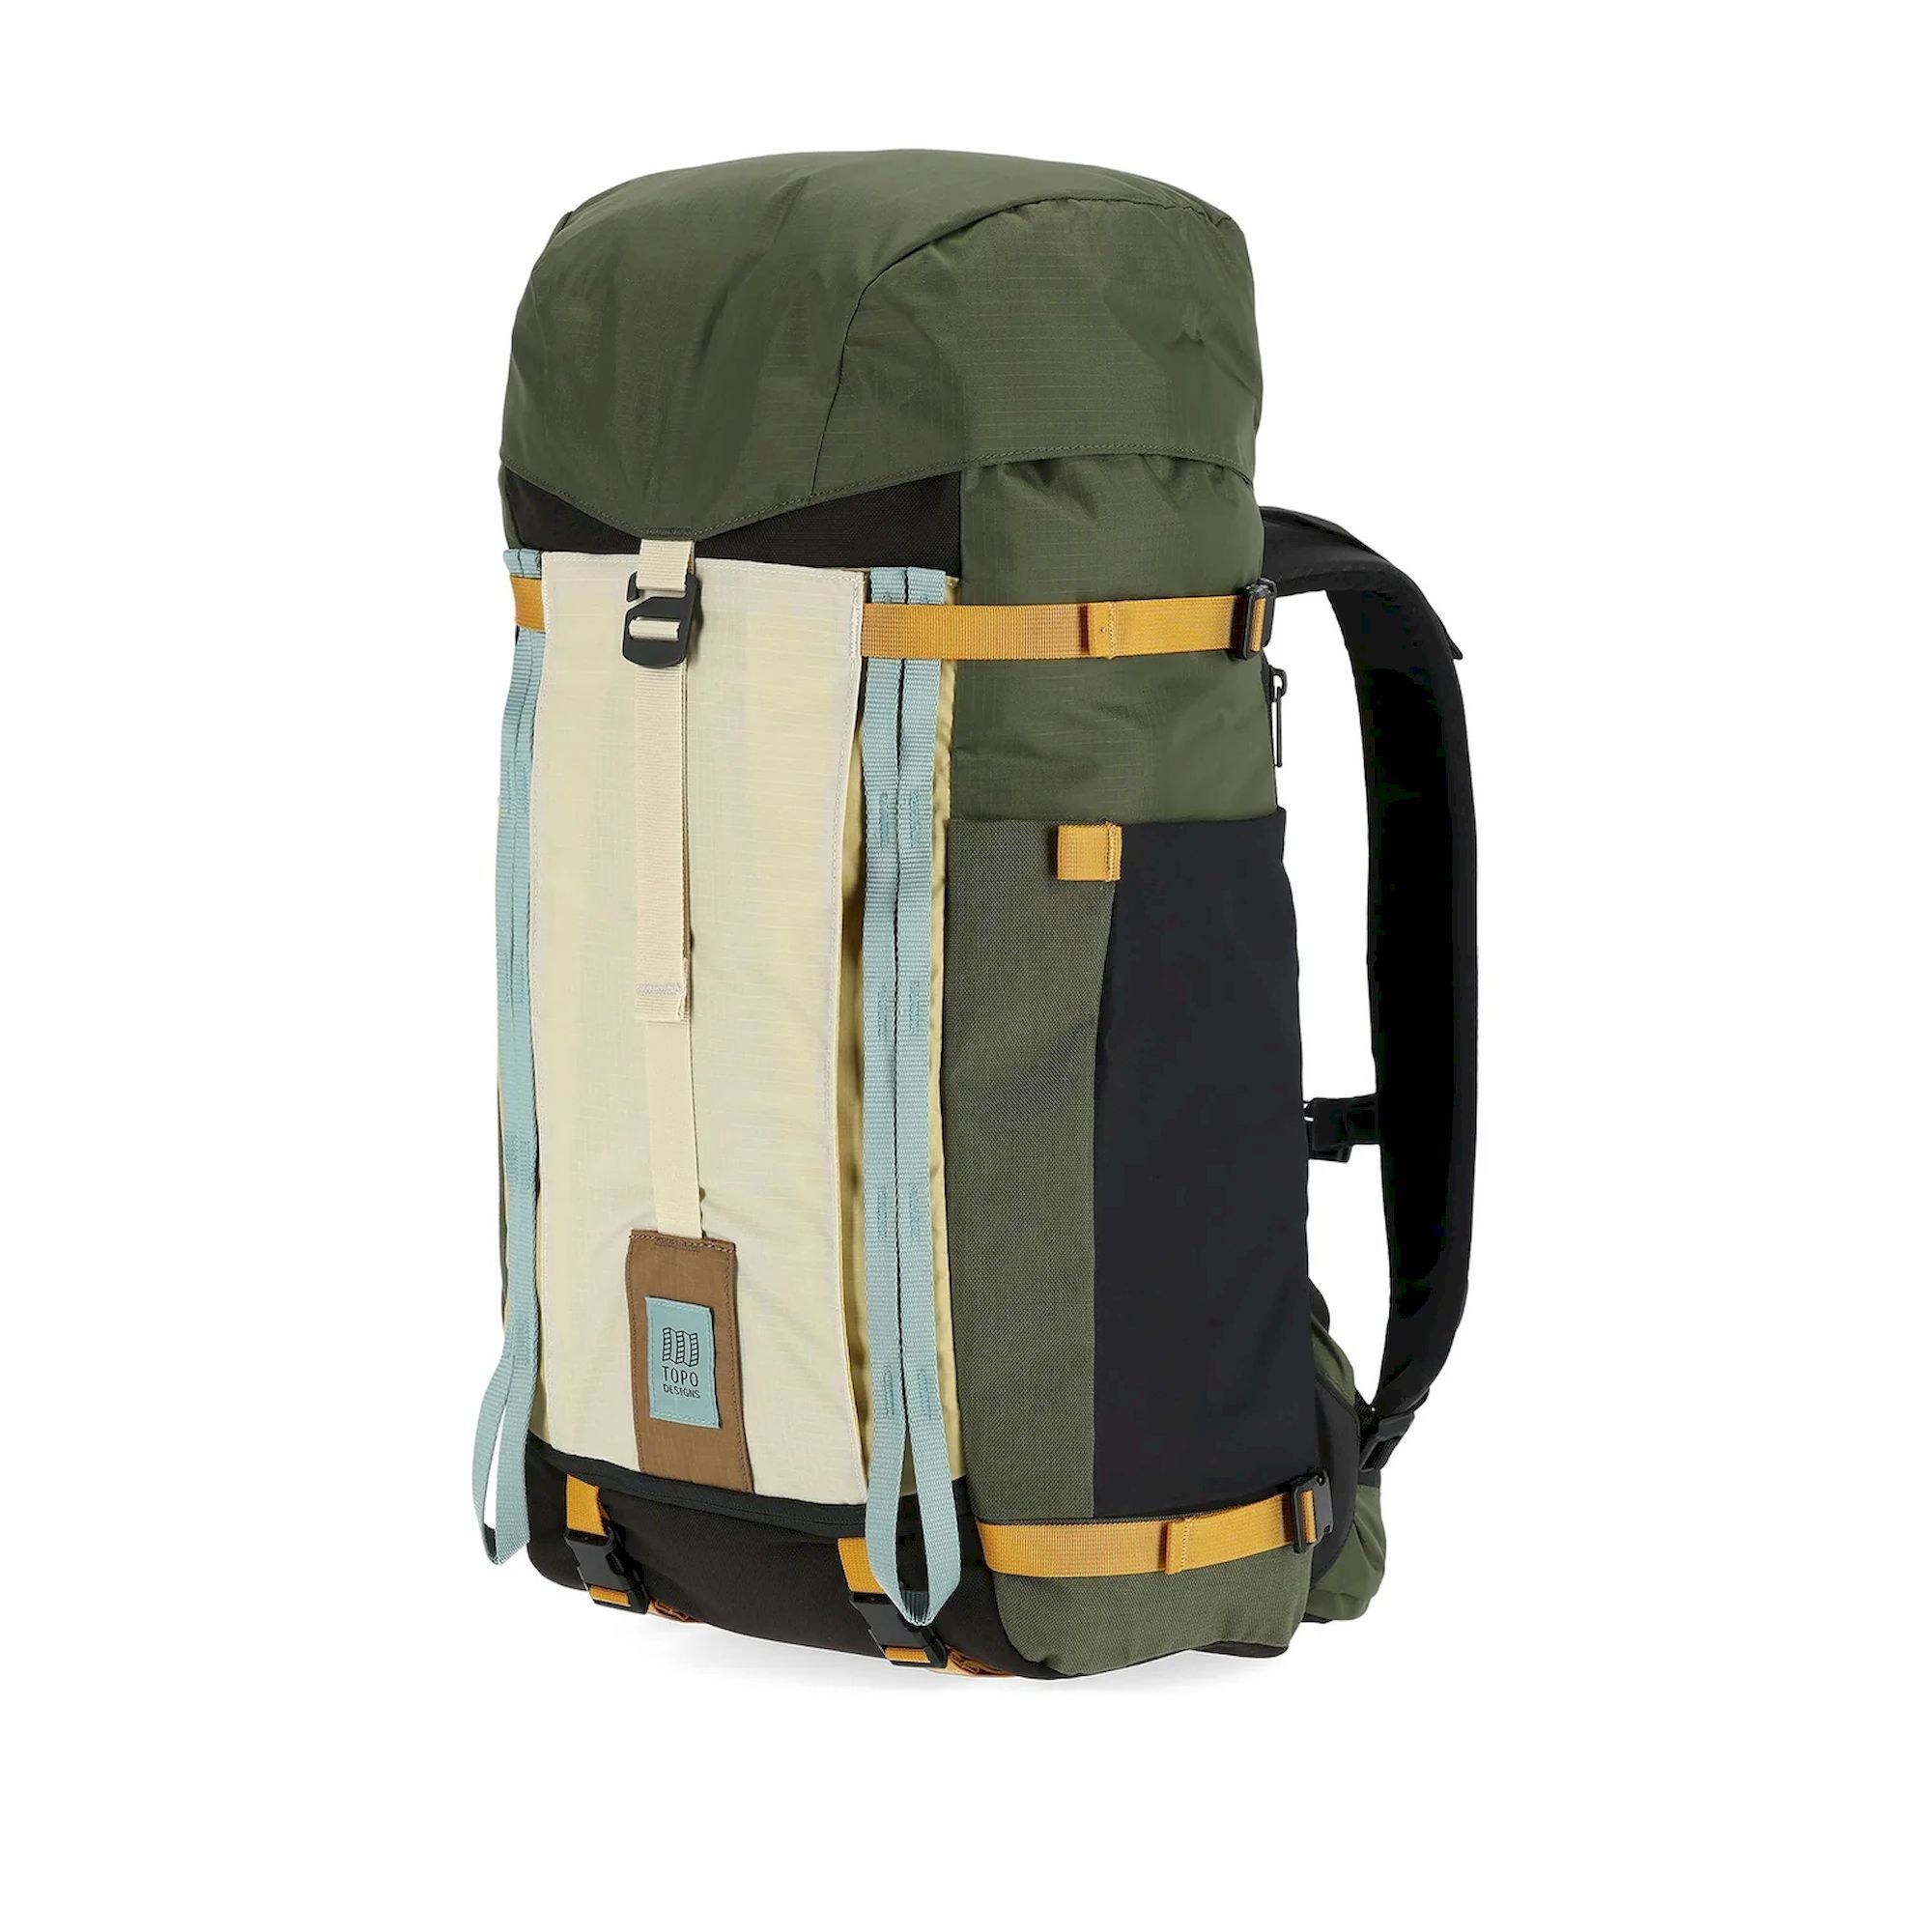 Topo Designs Mountain Pack 28L - Walking backpack